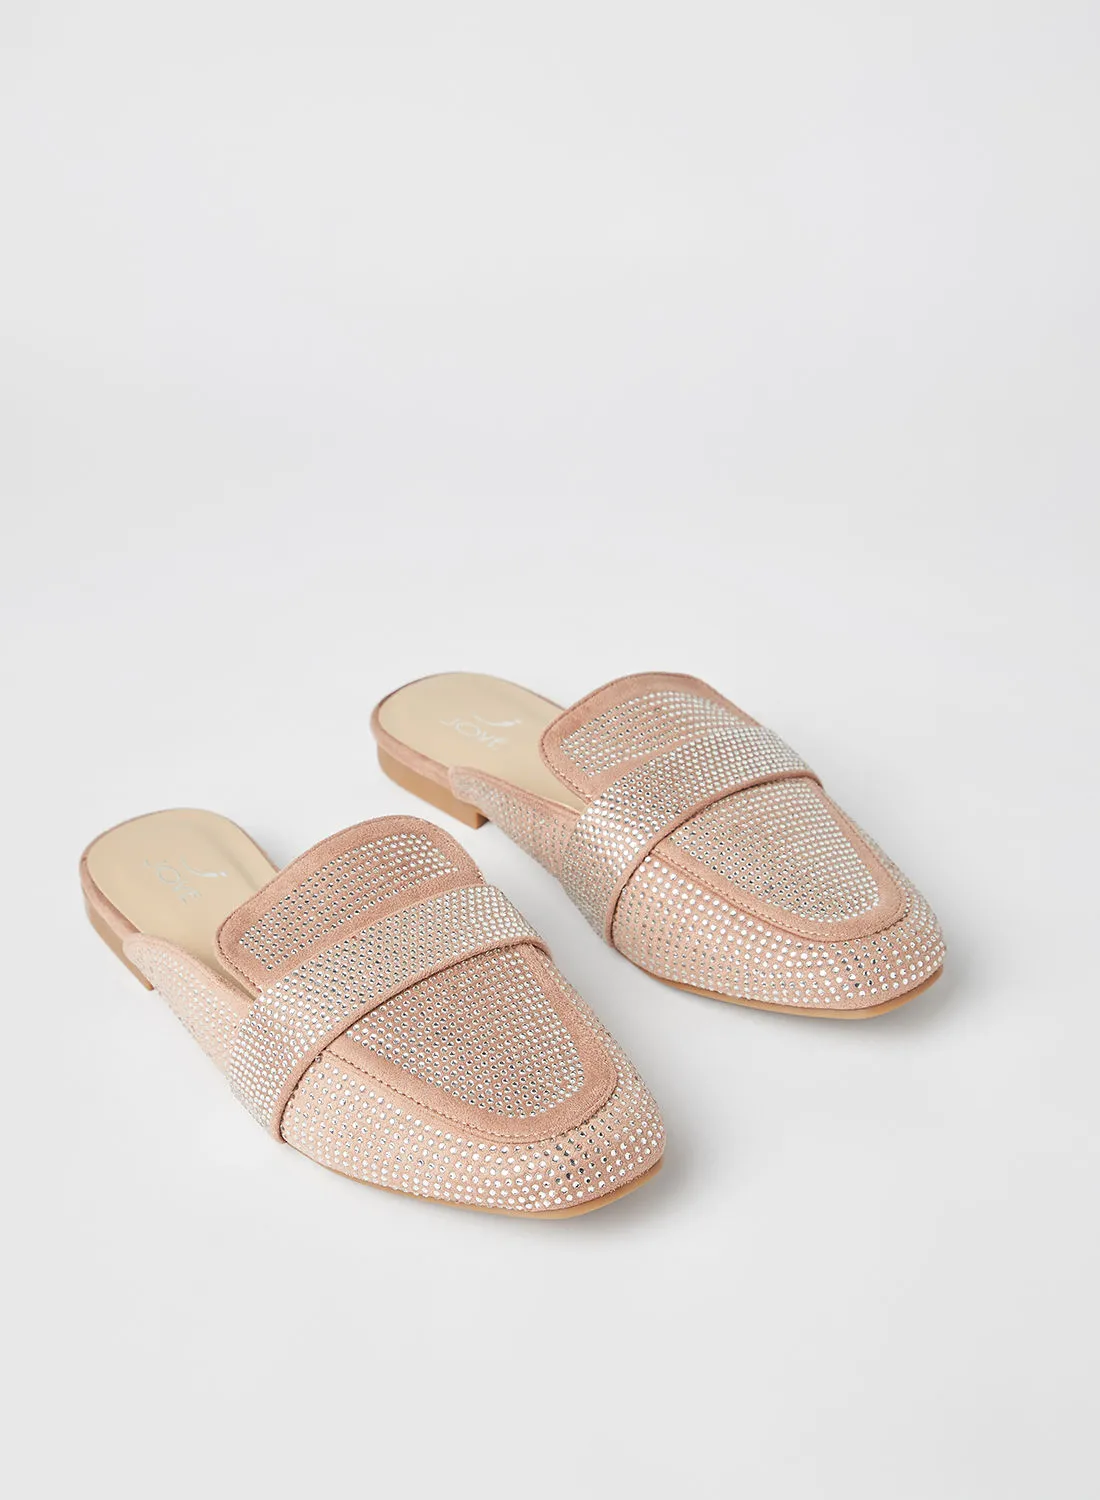 Jove Casual Textured Round Toe Slip-On Mules Pink